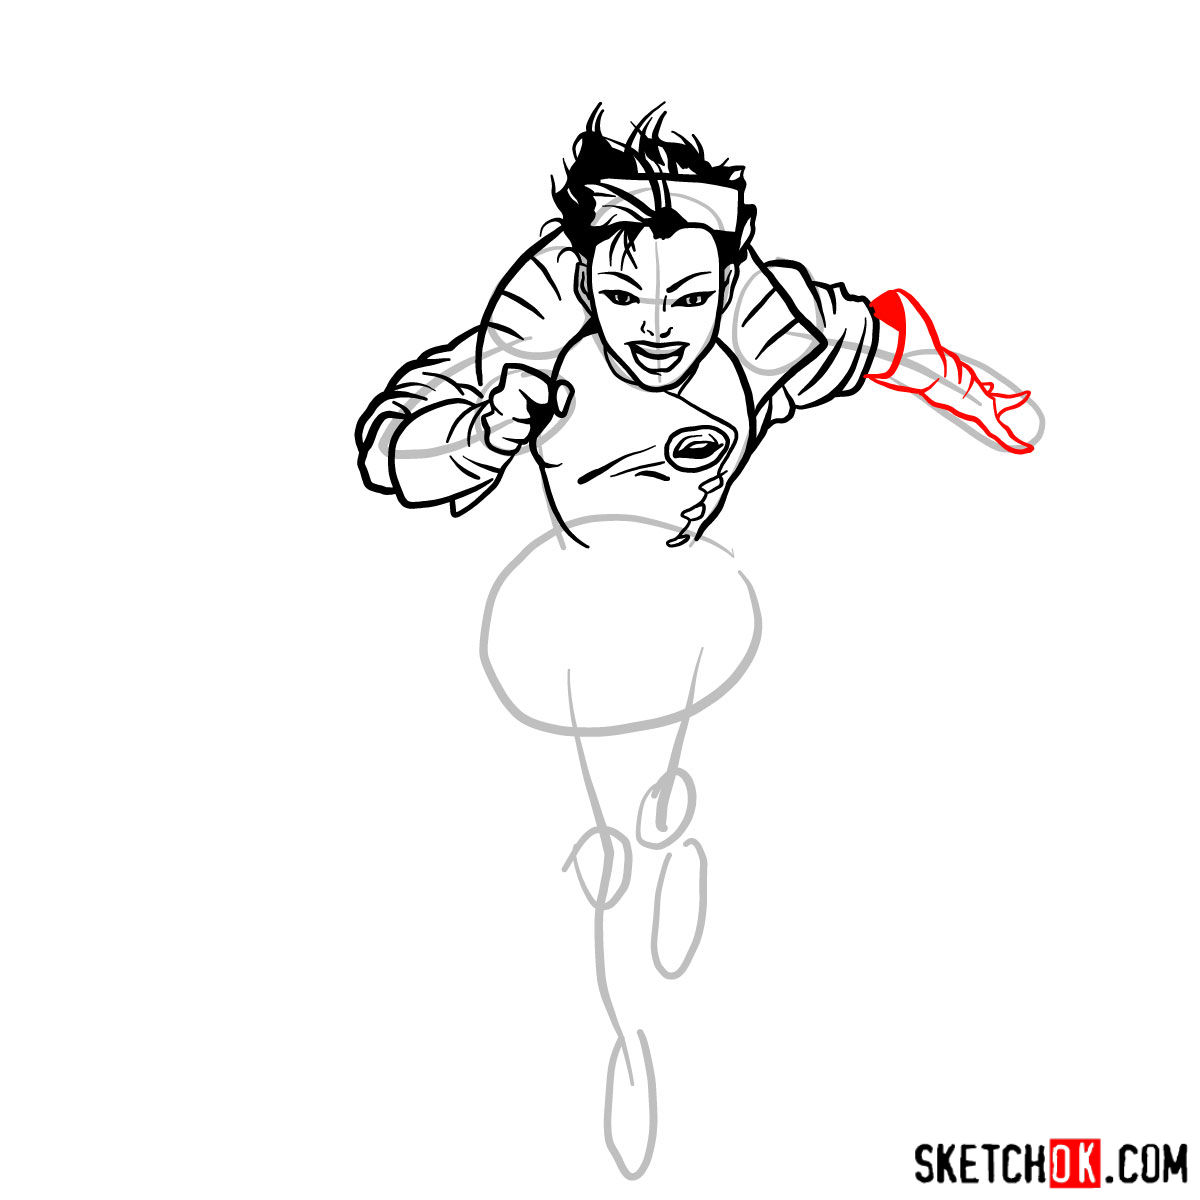 How to draw Jubilee mutant from X-Men series - step 09